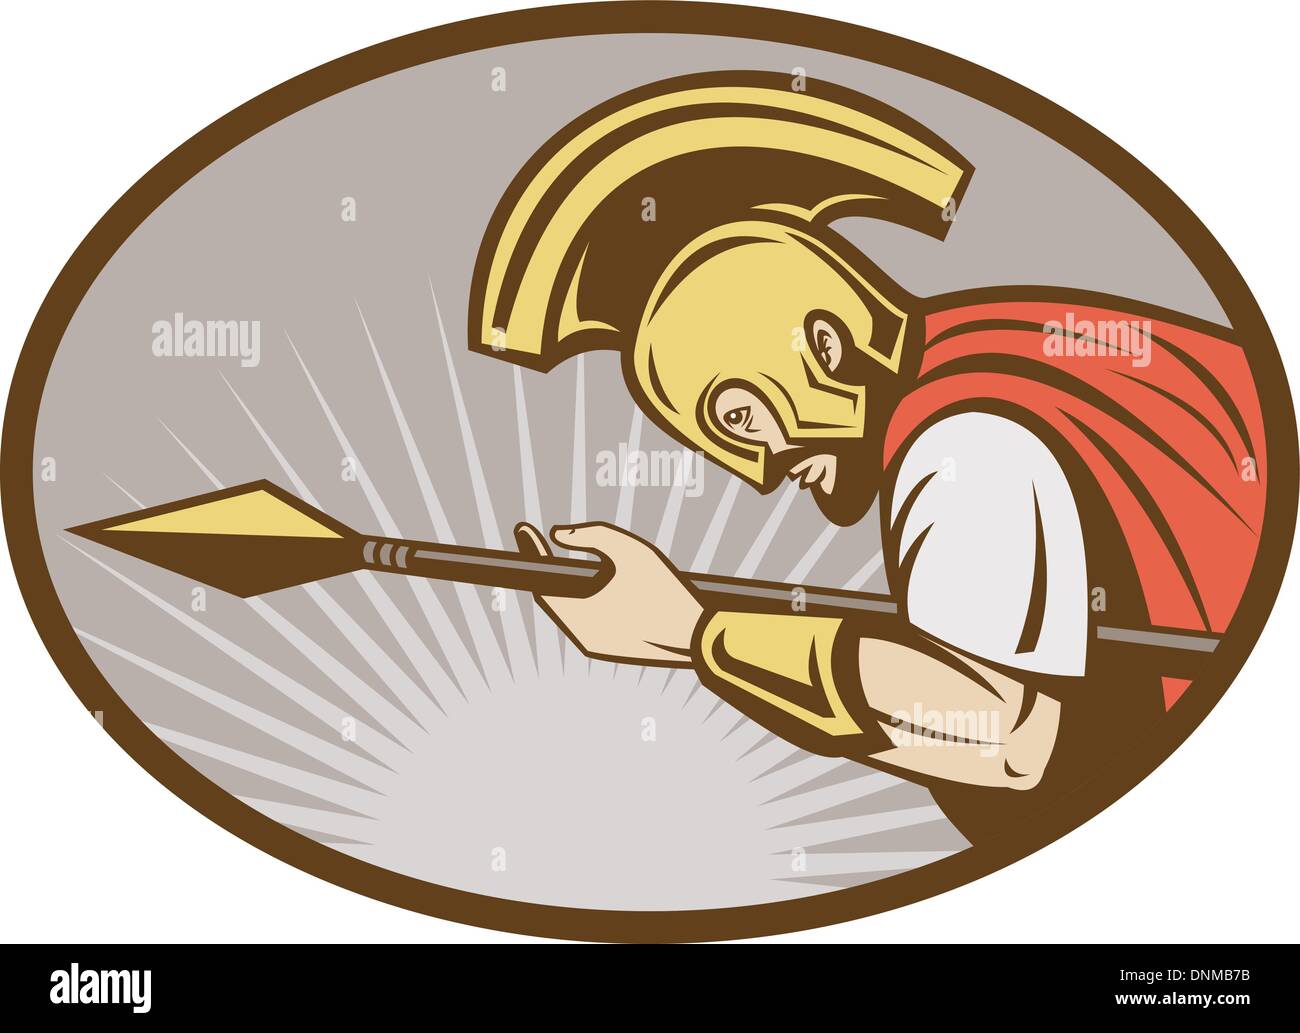 illustration of a Roman soldier or gladiator attacking with spear Stock Vector